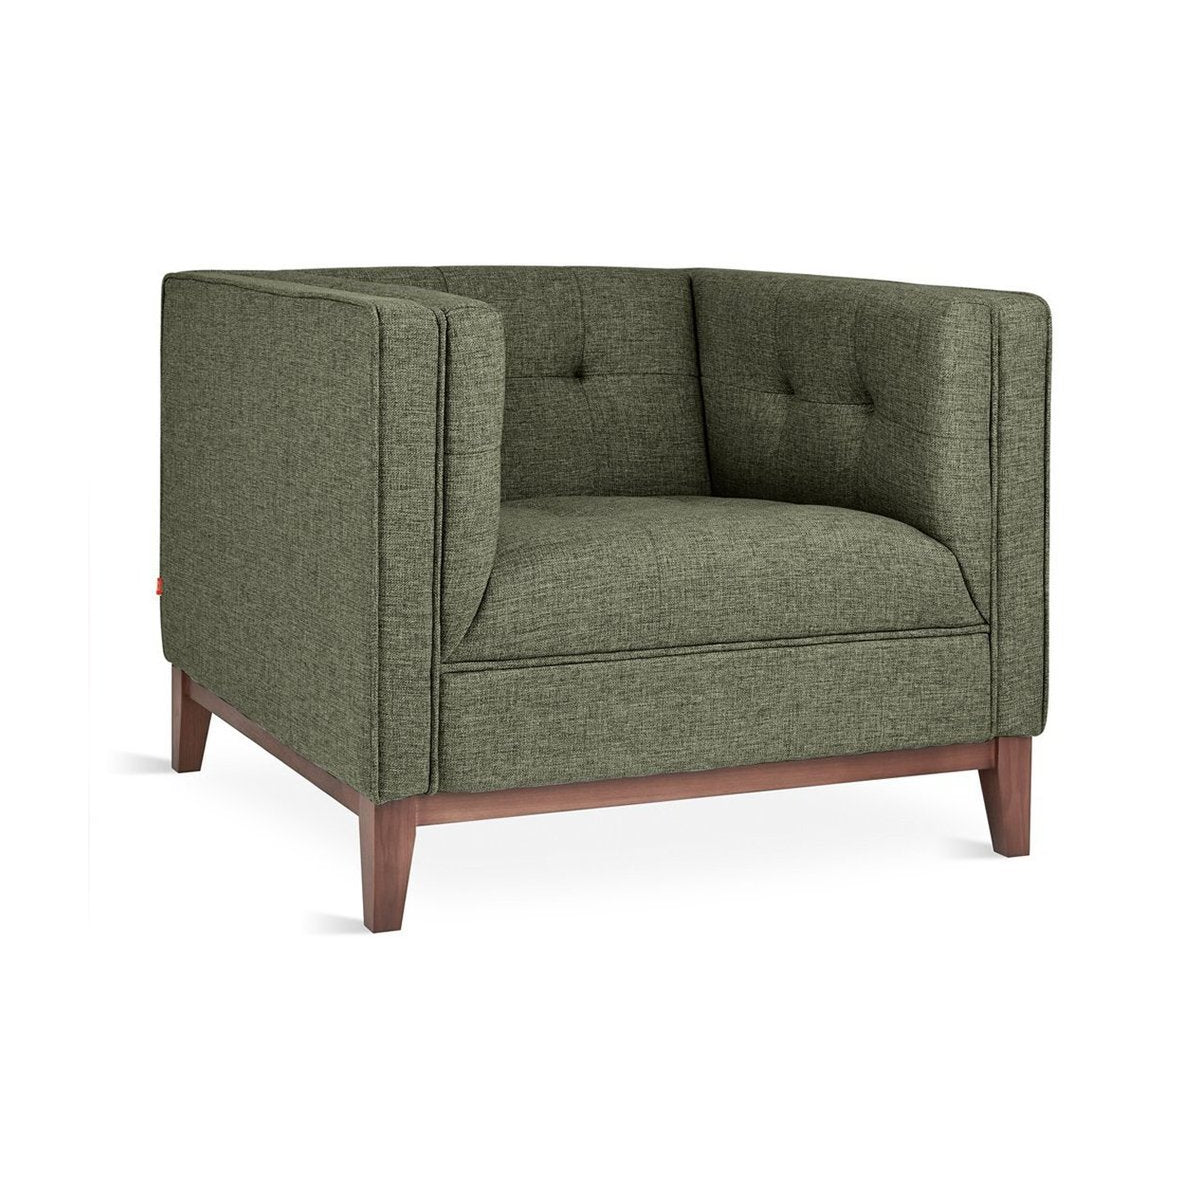 Load image into Gallery viewer, Atwood Chair Lounge Chair Gus*     Four Hands, Burke Decor, Mid Century Modern Furniture, Old Bones Furniture Company, Old Bones Co, Modern Mid Century, Designer Furniture, https://www.oldbonesco.com/
